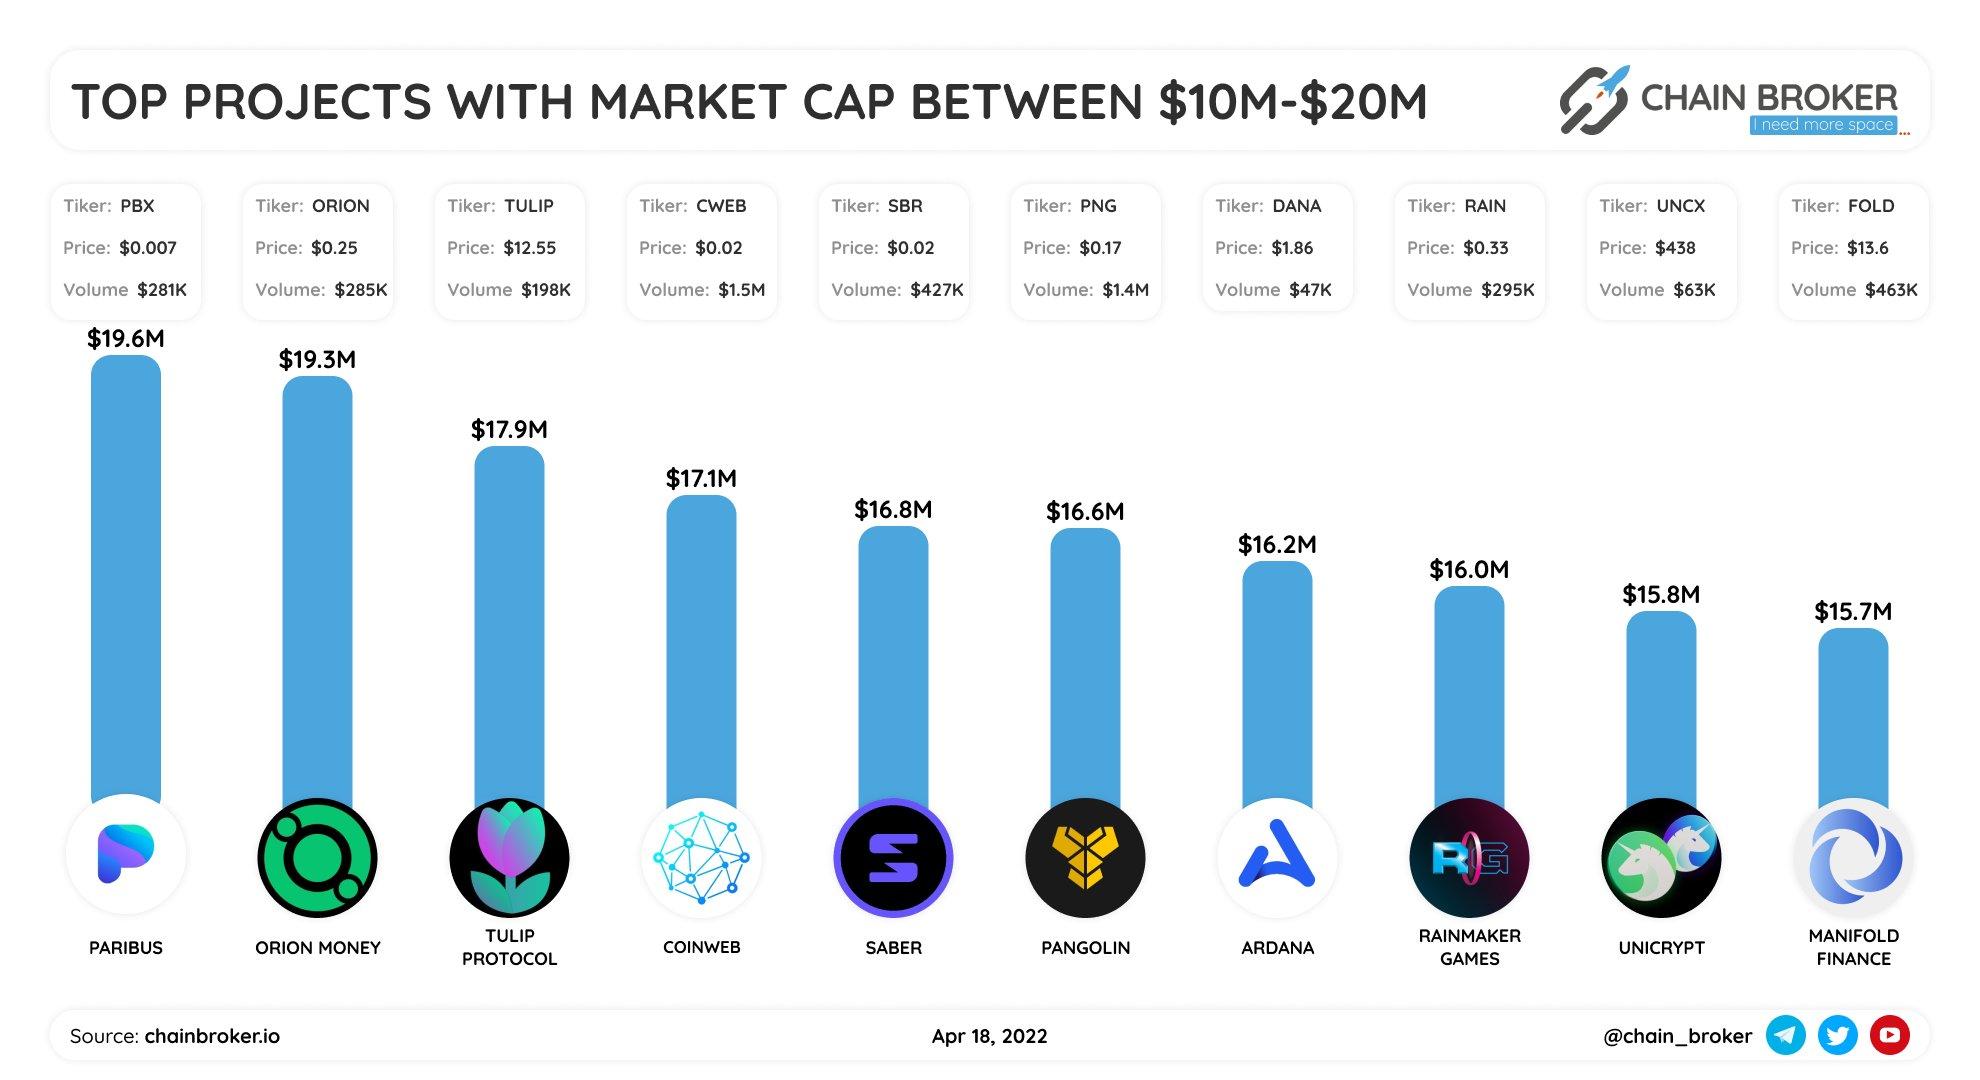 Top projects with market cap between $10M-$20M